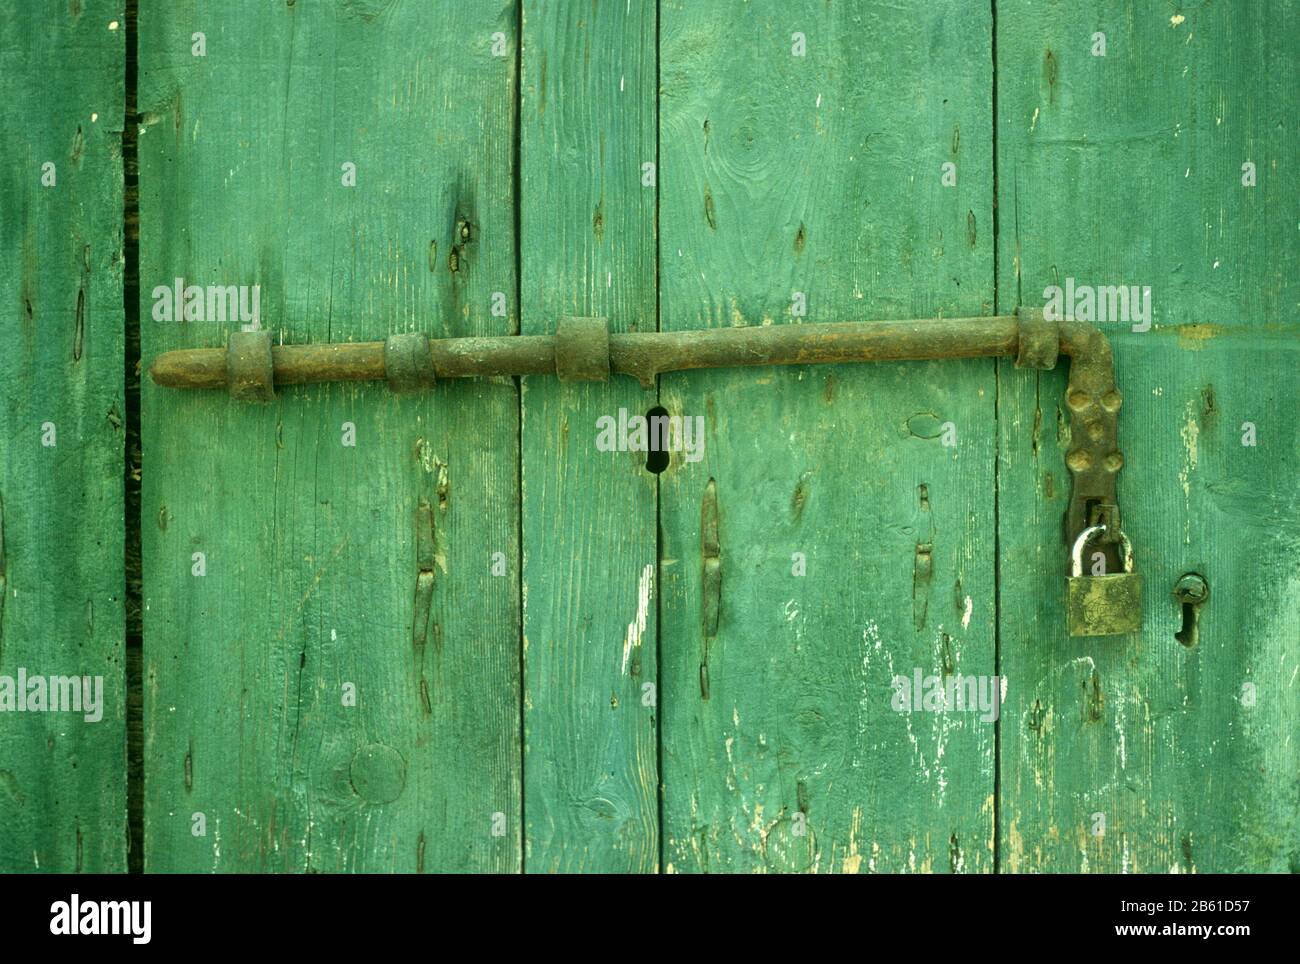 Hand made fittings on an old wooden, painted, green door in Metsovo, Ioannina, Epirus, Greece Stock Photo